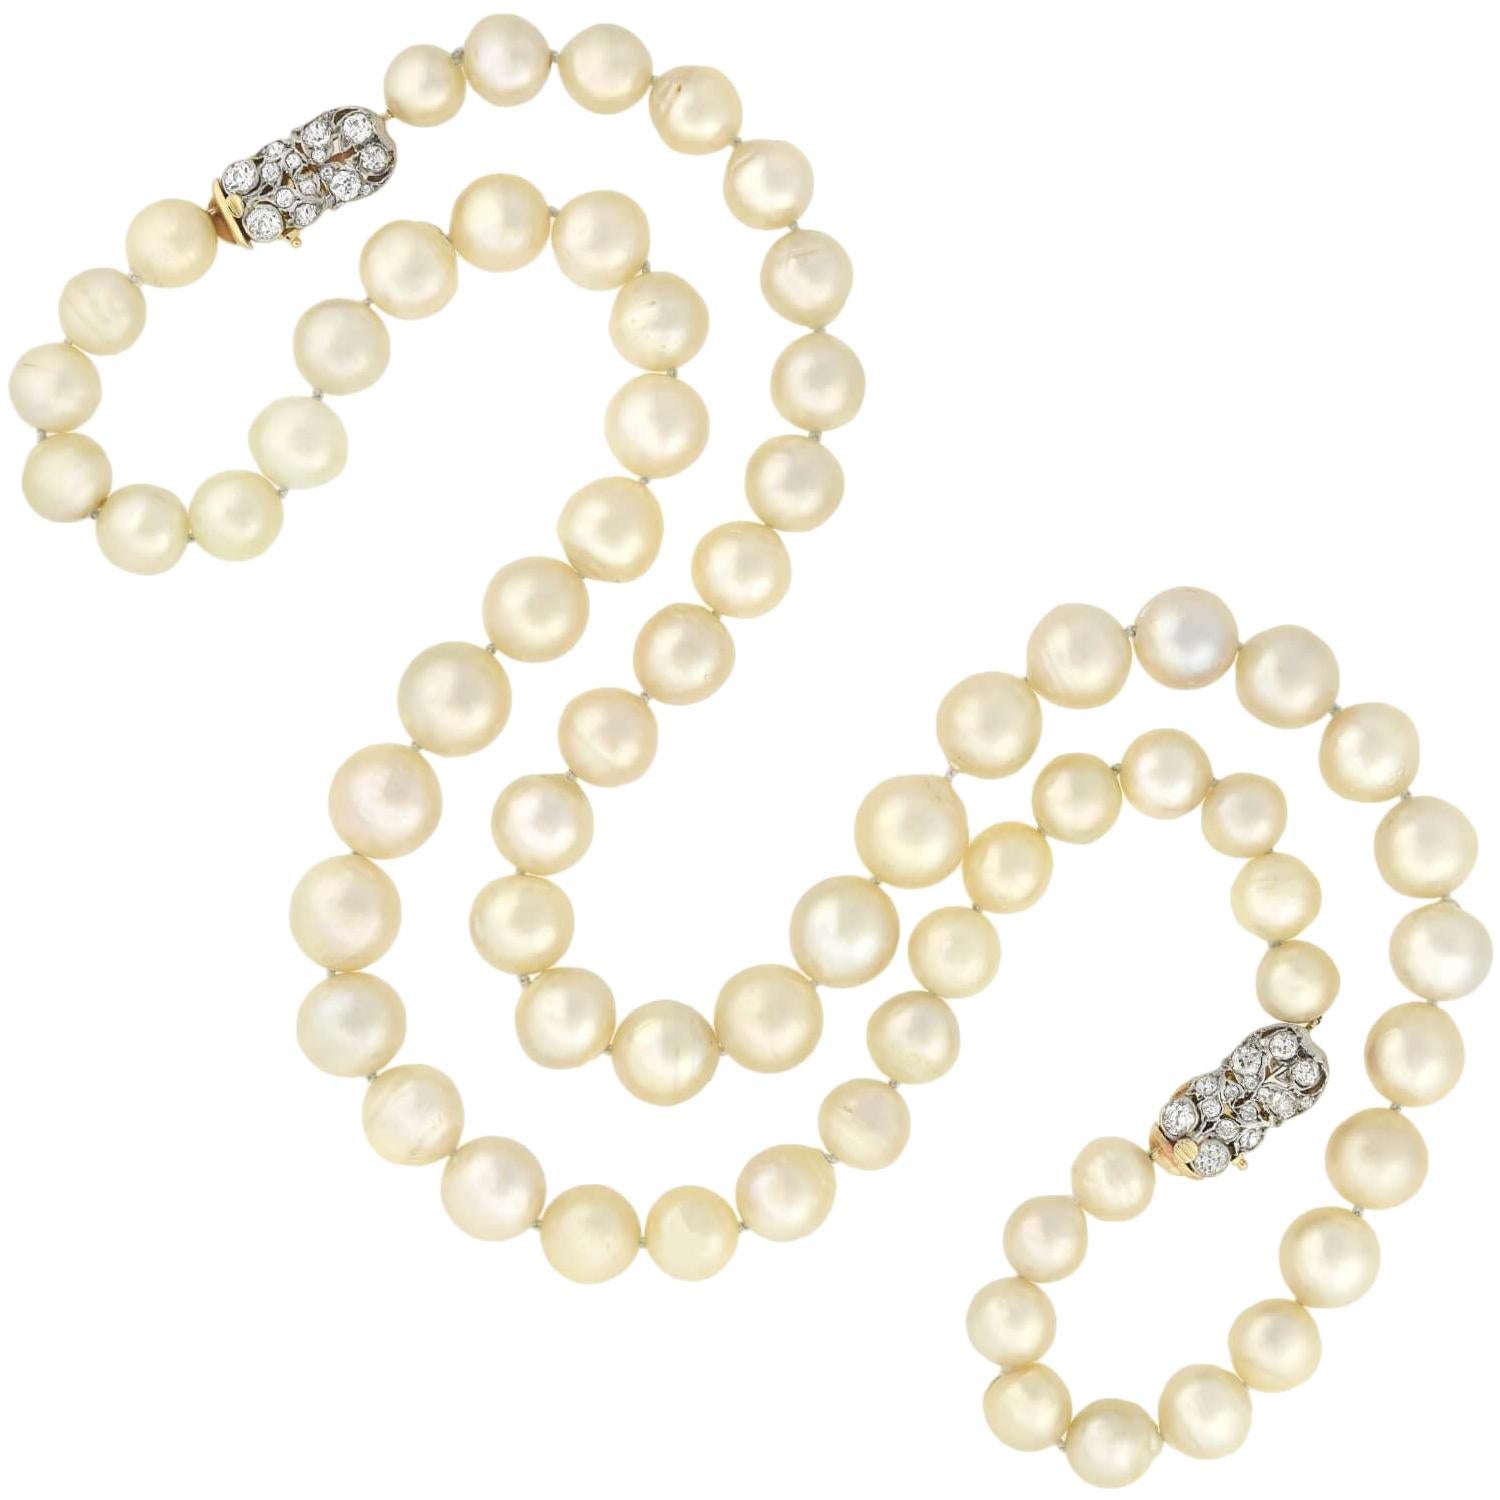 Edwardian South Sea Pearl Convertible Necklace with Diamond Clasps